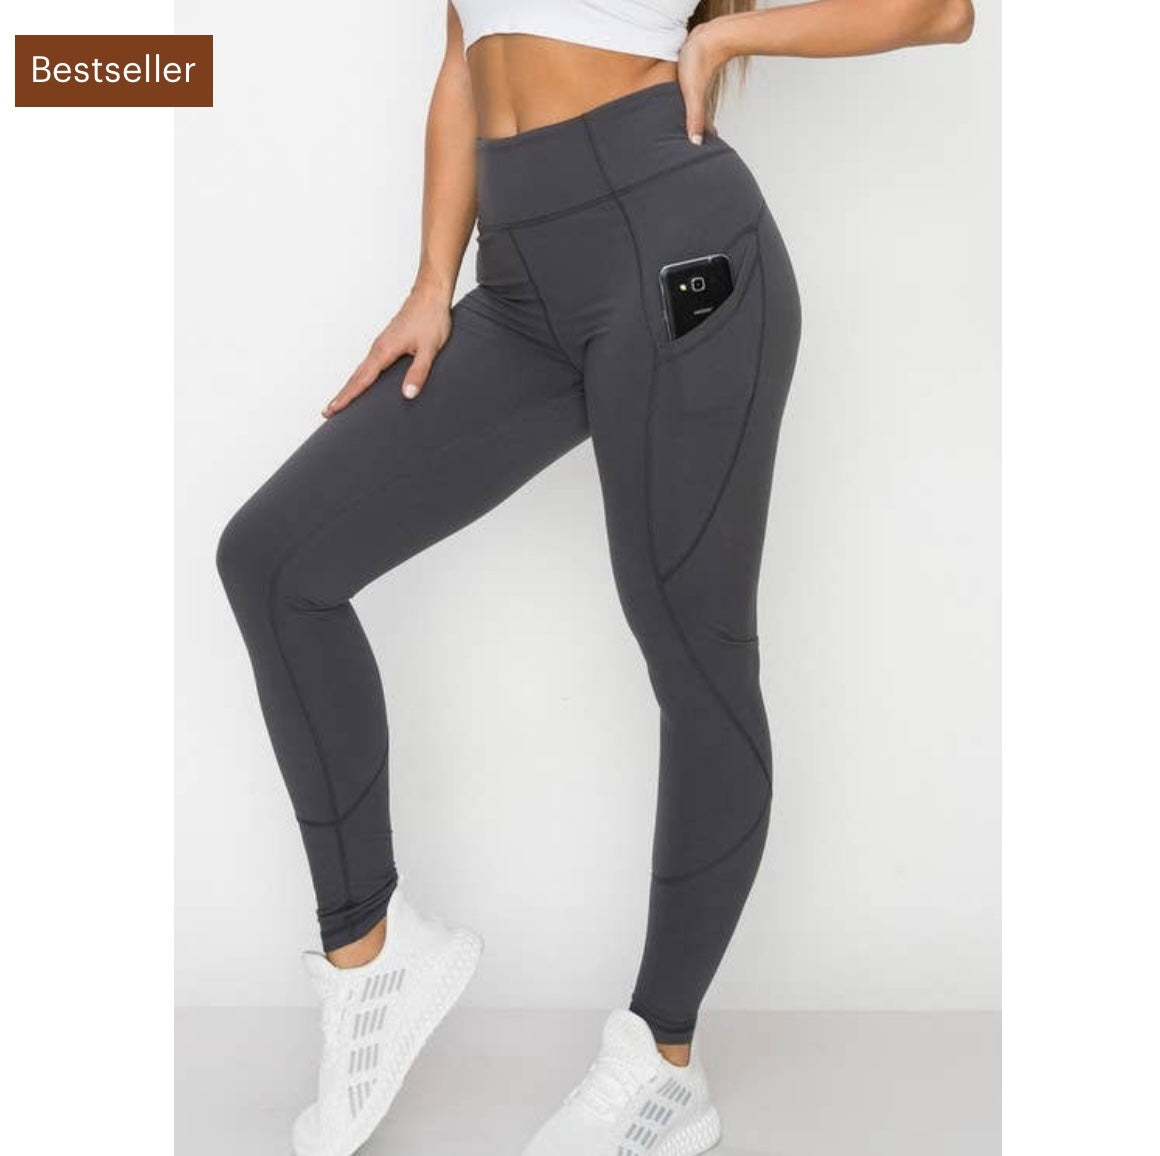 High-Waisted Seam Detail Yoga Pants with Pockets